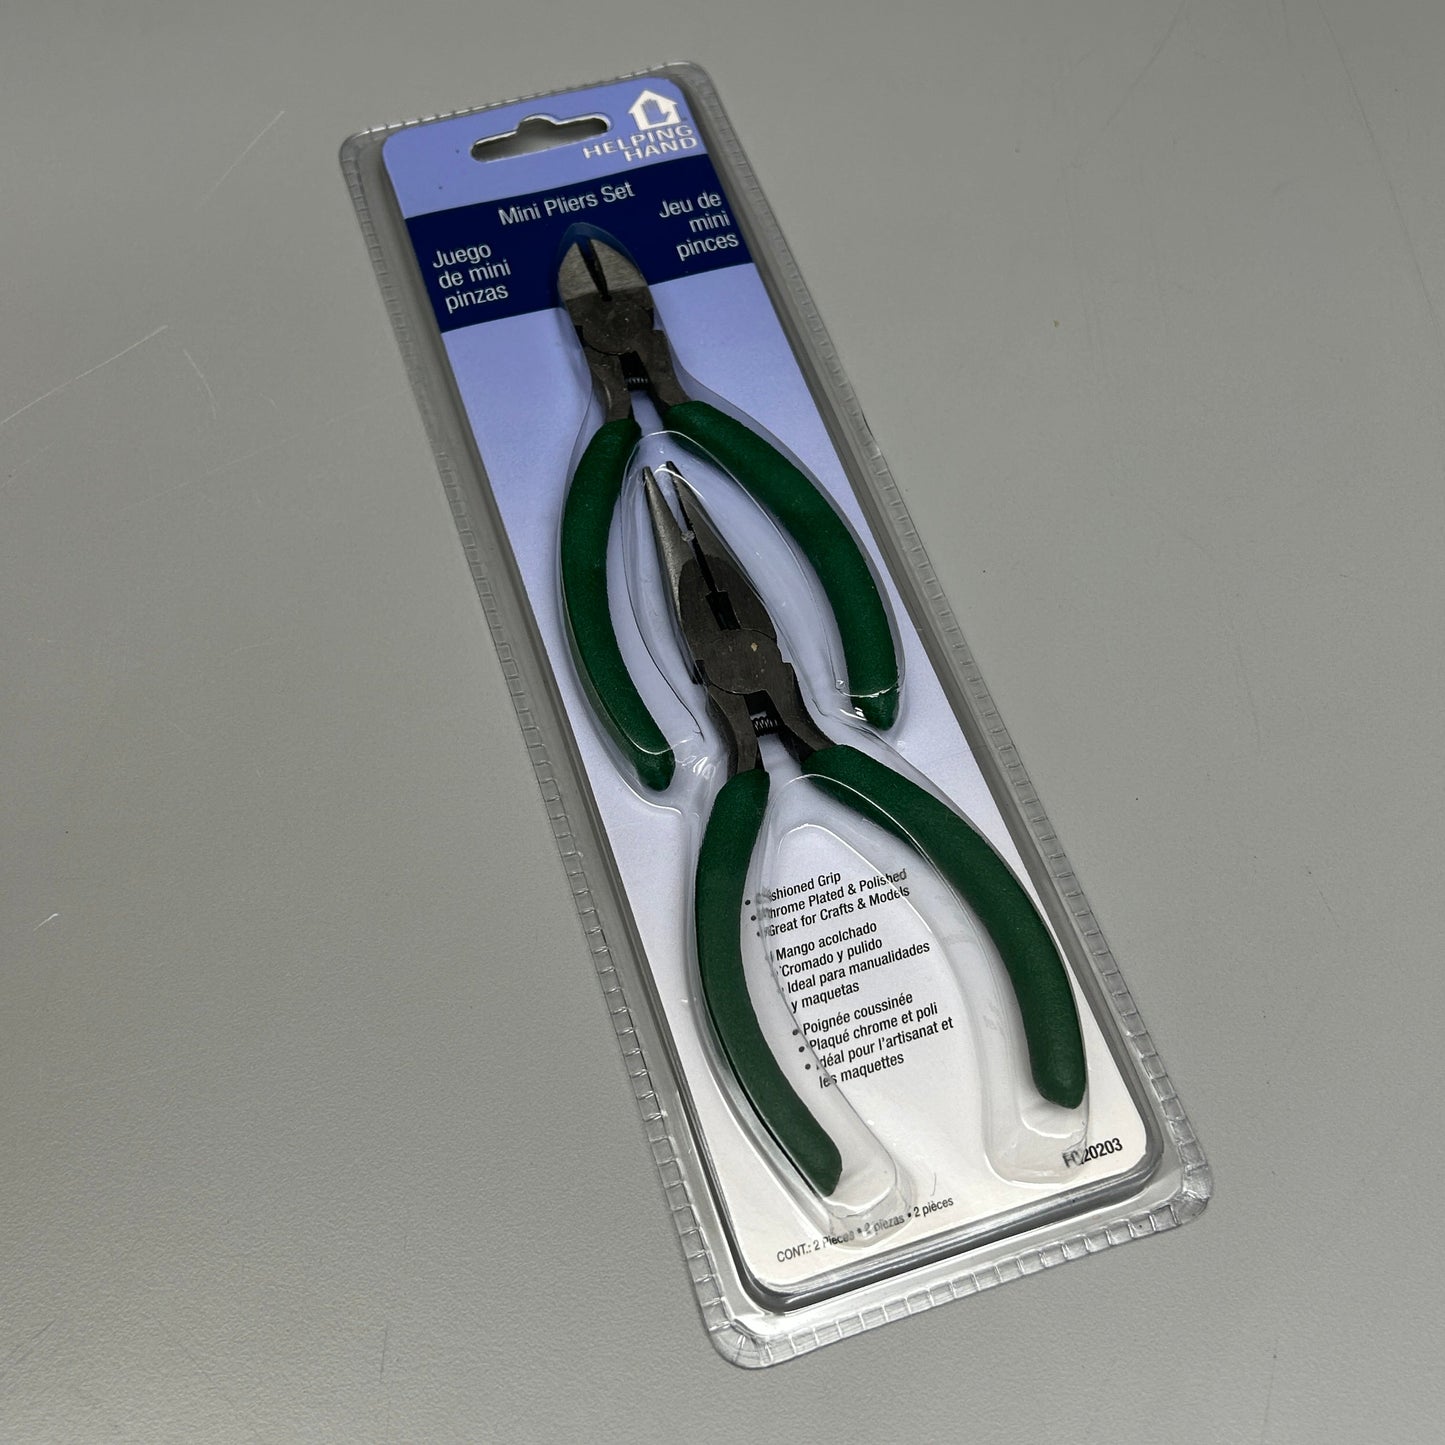 Z@ HELPING HAND 2 Mini Pliers Set Cushioned Grip (New)